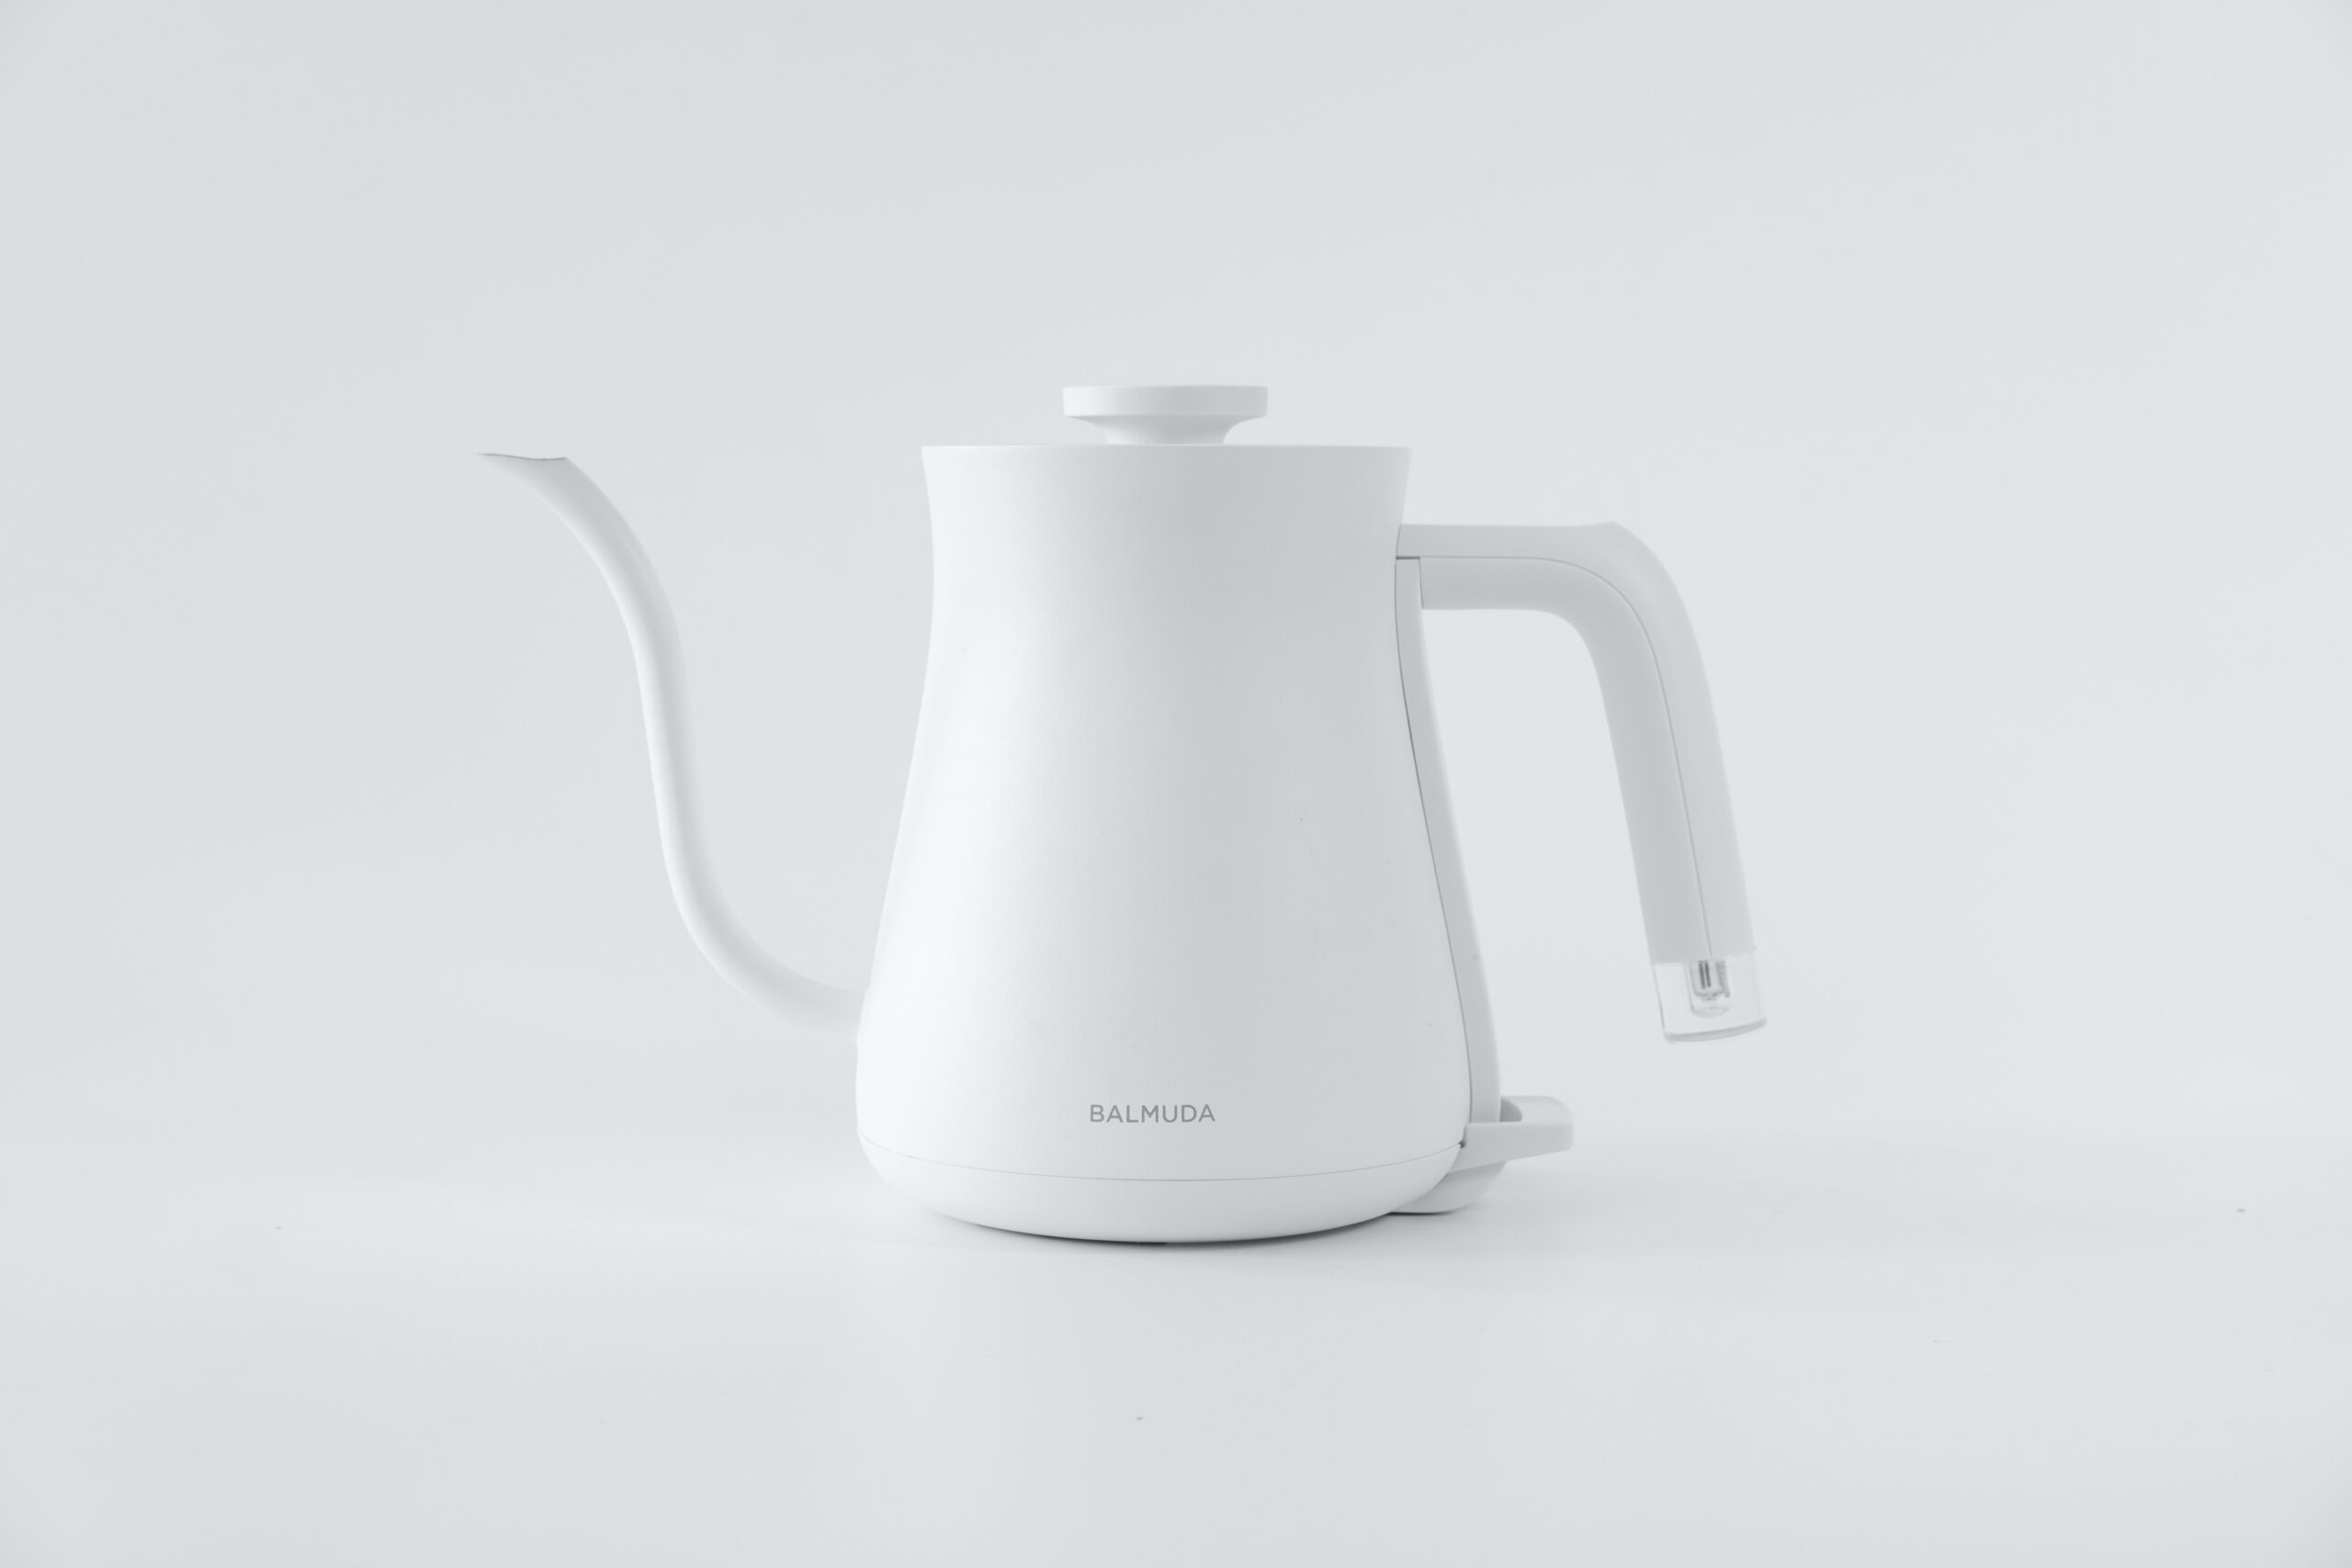 Balmuda The Kettle Review: An Electric Kettle for Coffee Lovers